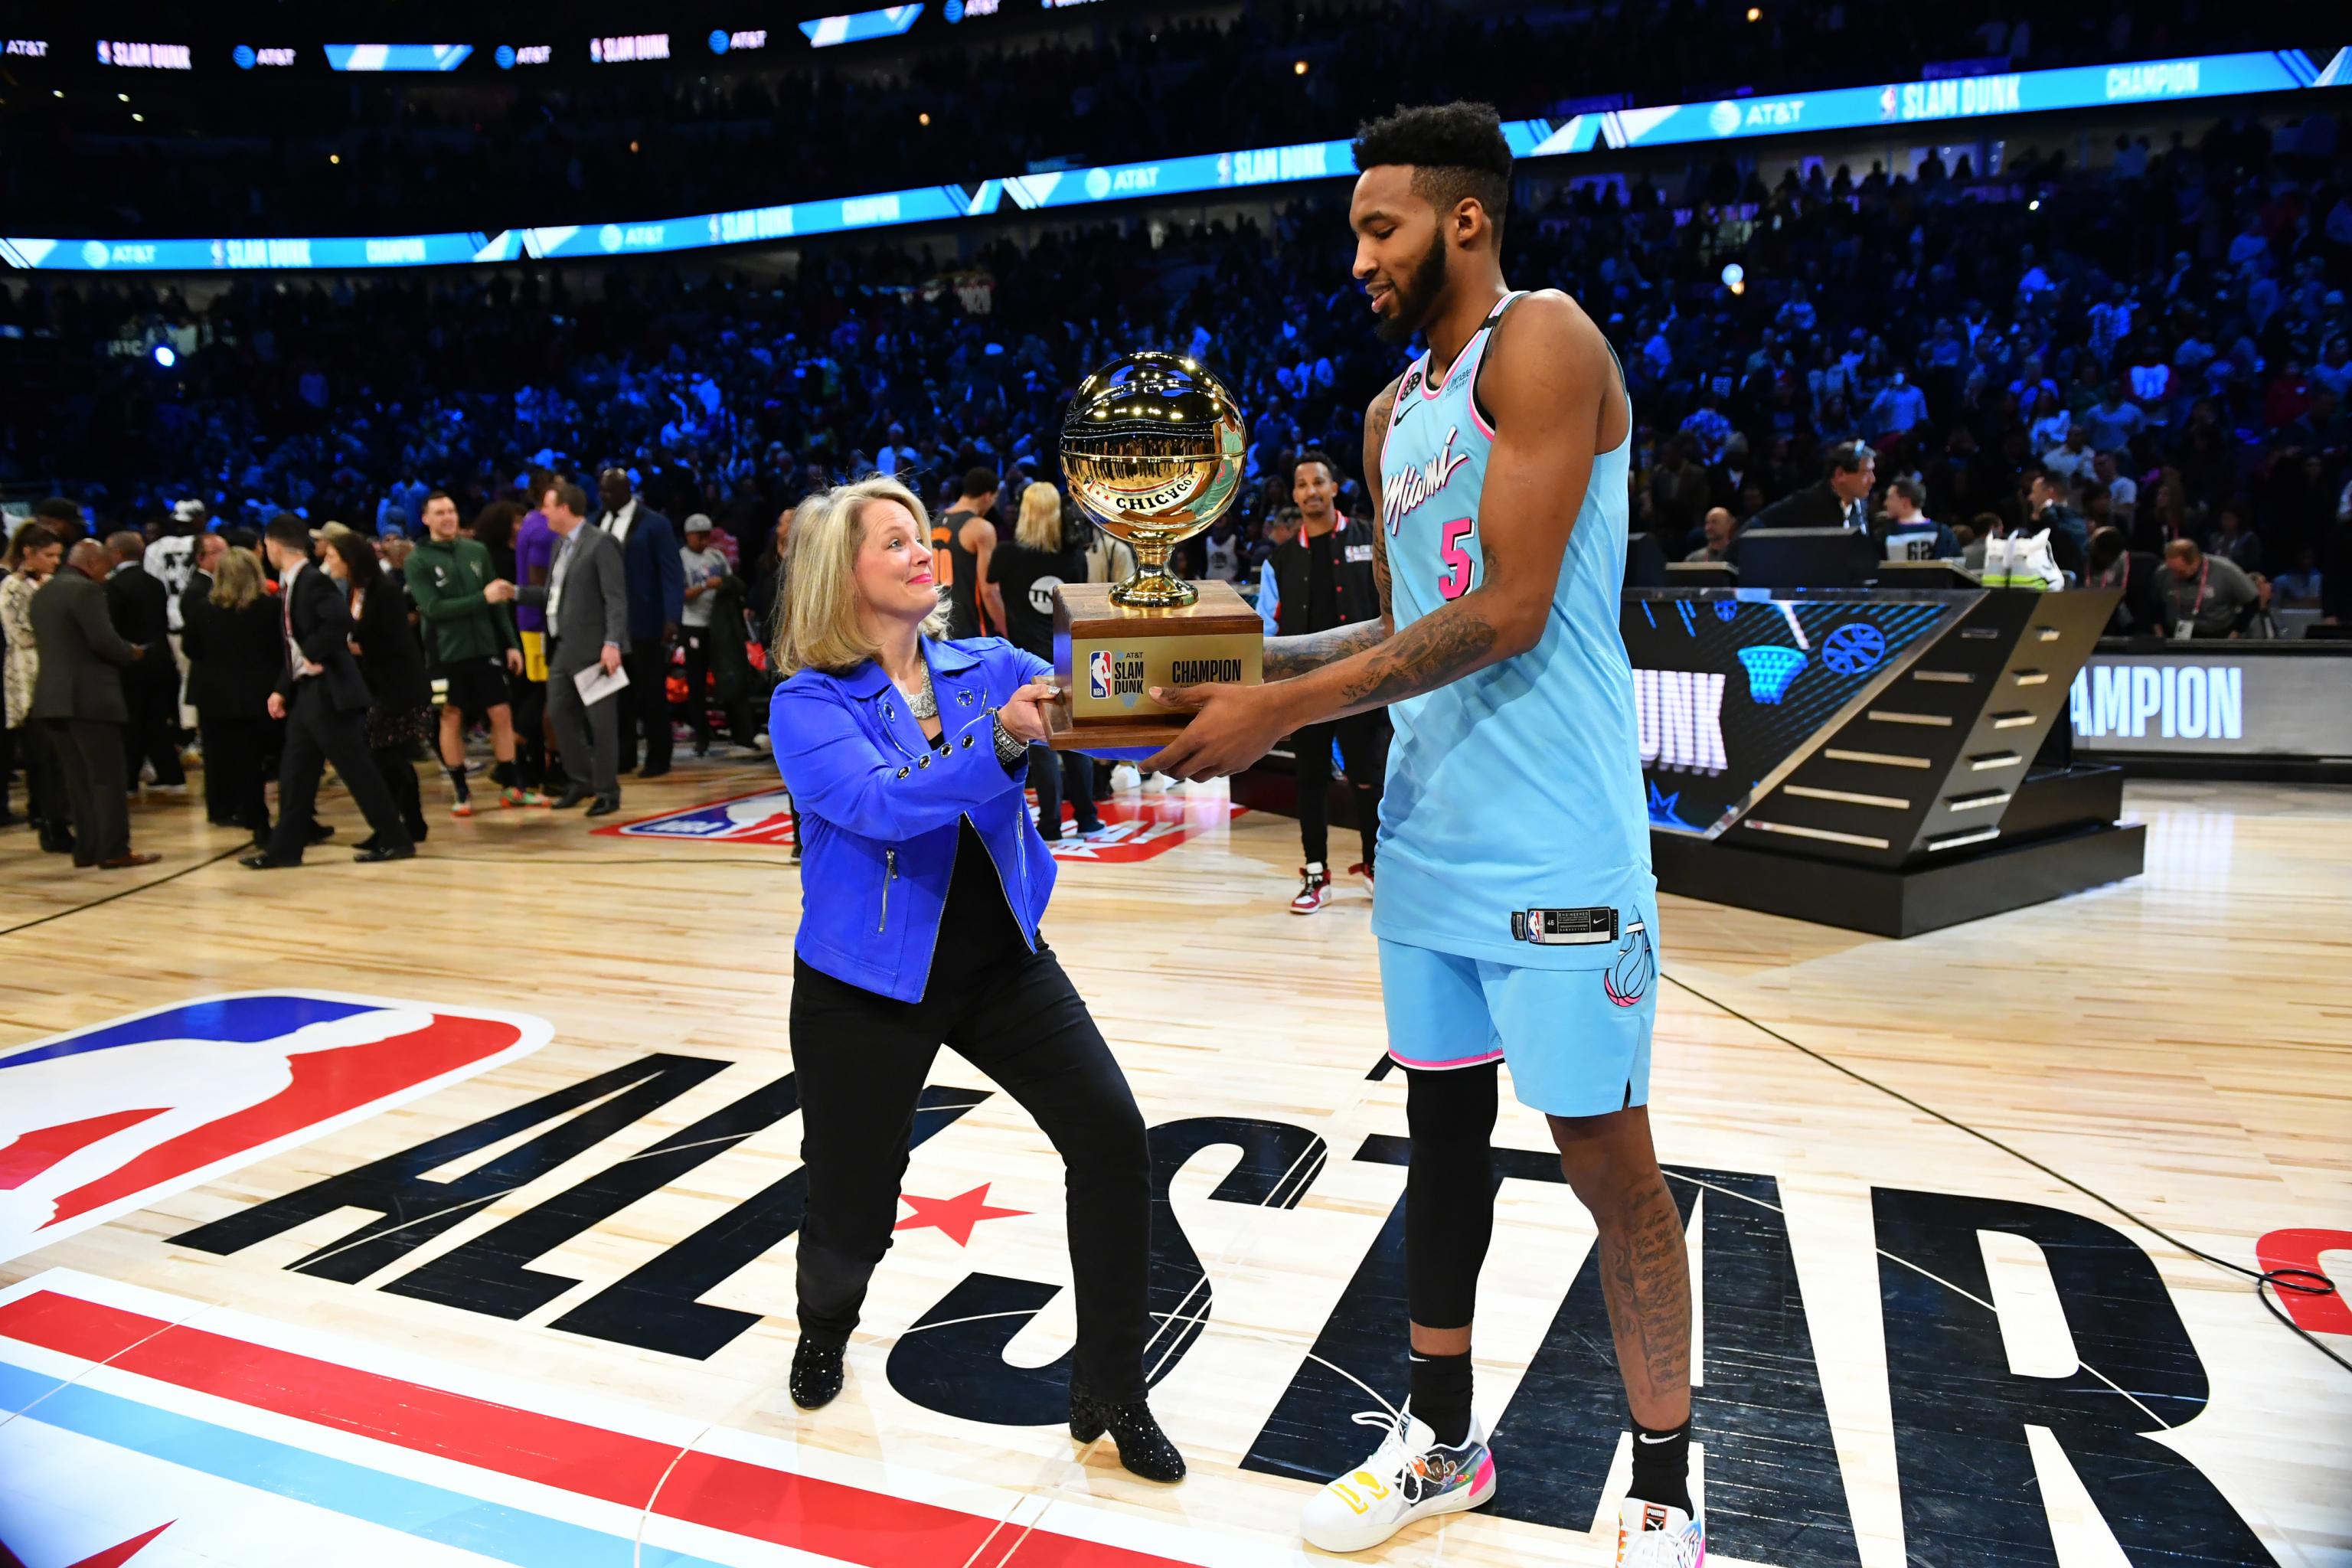 How Much Money the Winners of the NBA Slam Dunk Content Will Earn